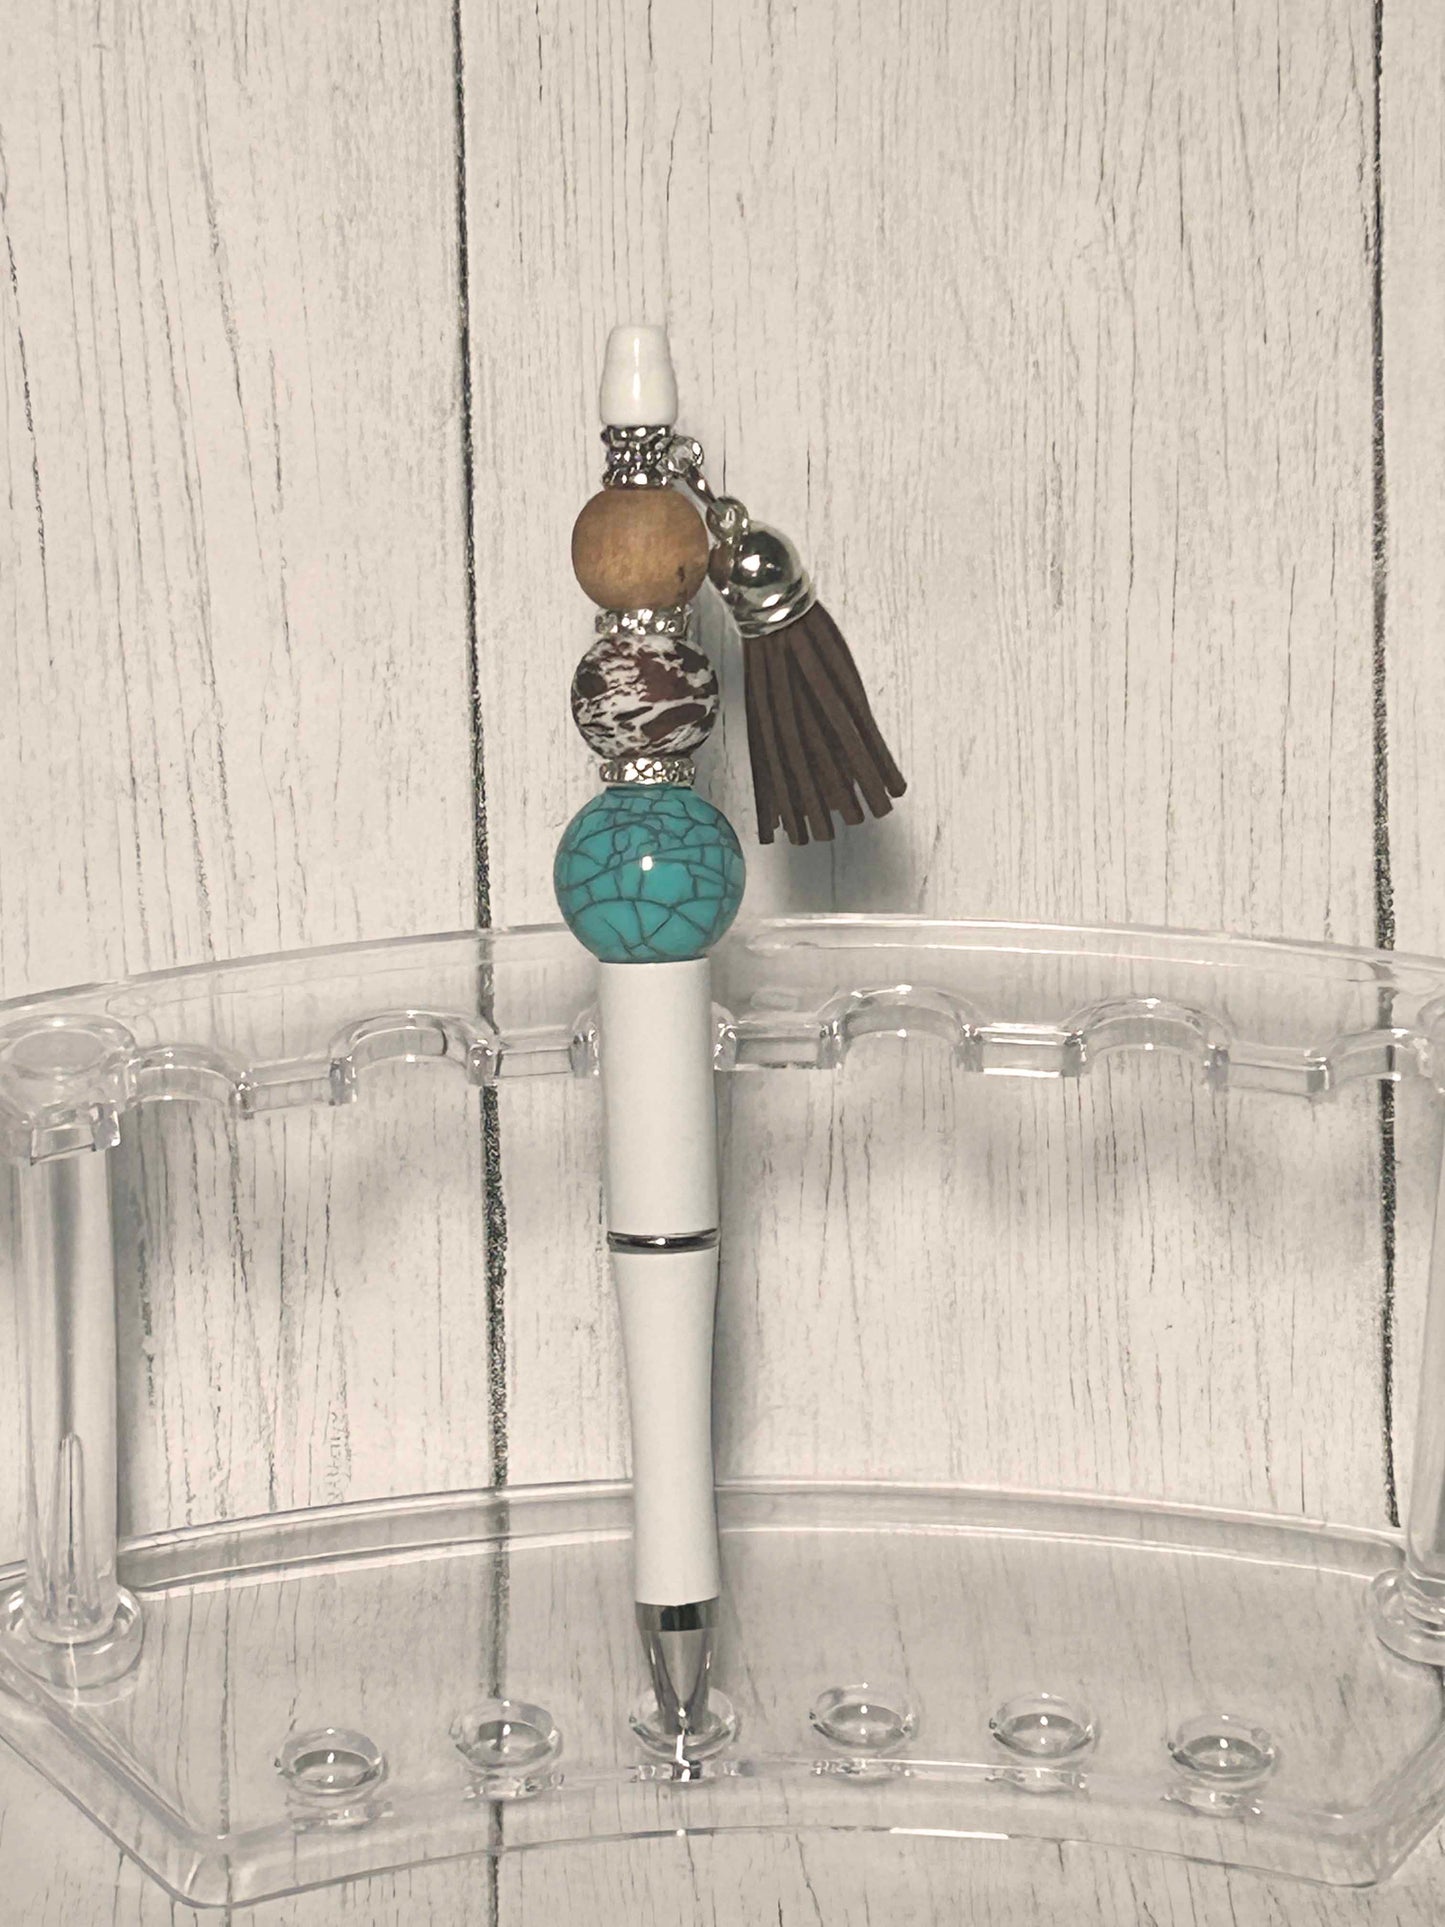 Heart of the West Beaded Pen